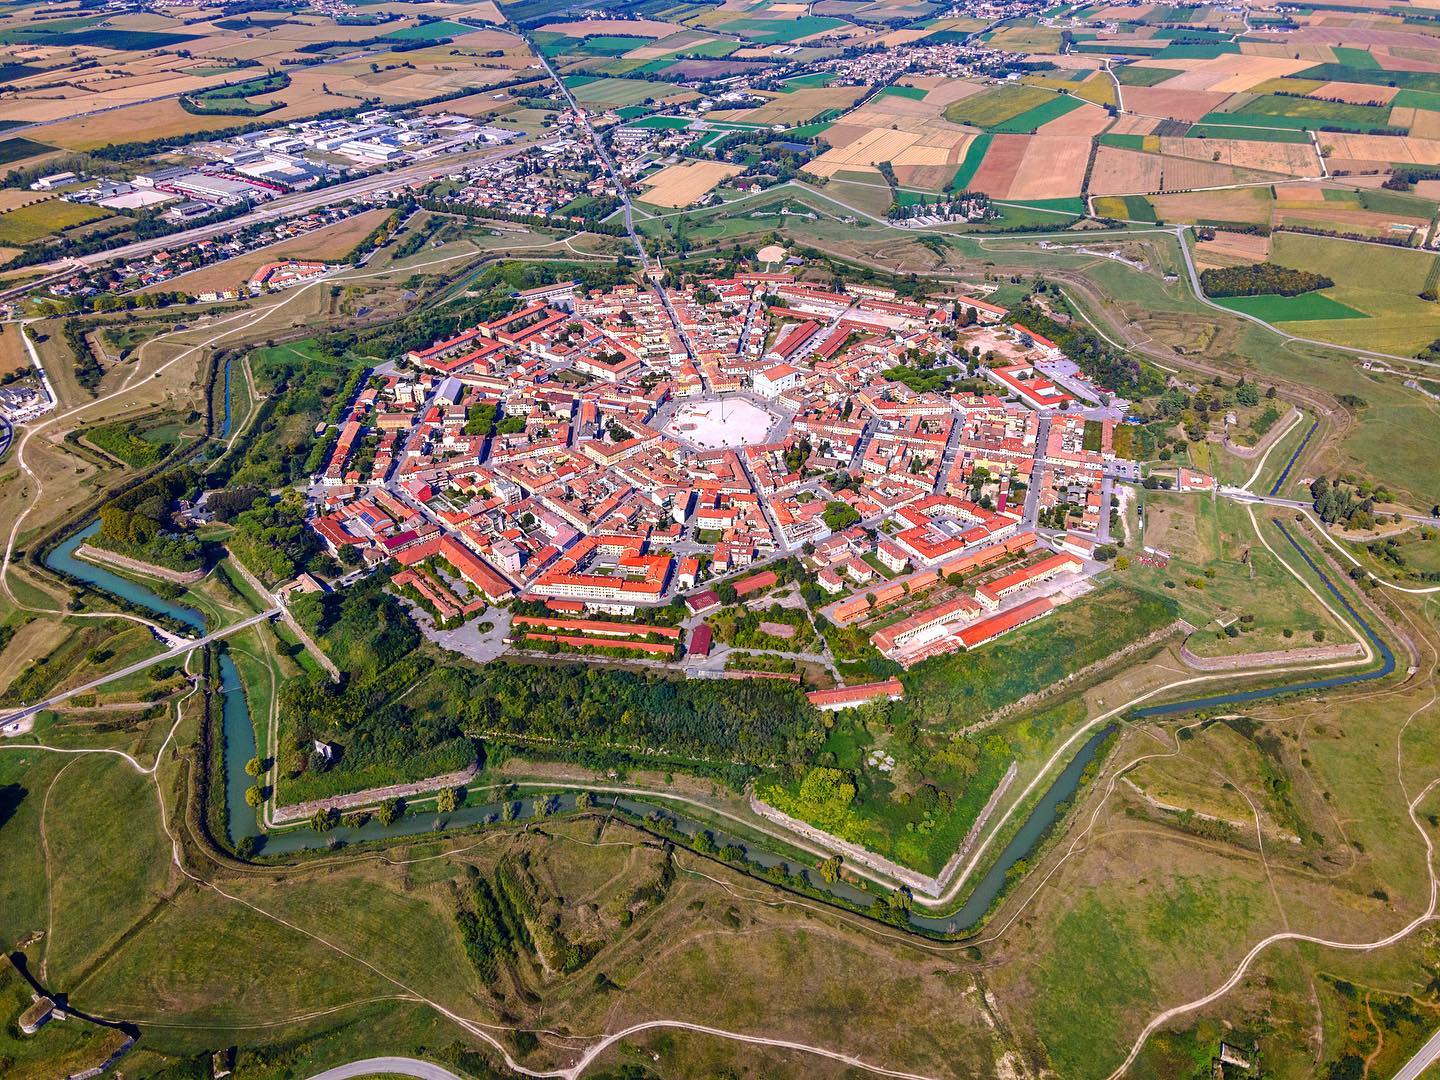 A star on earth 💫
.
Palmanova is a town and comune in northeastern Italy. The town is an example of star fort of the late Renaissance, built up by the Venetian Republic in 1593.
.
.
#palmanova #palmanovaoutlet #palmanovaoutletvillage #palmanovaitaly #italy #italia #star #unesco #visititalia #italytrip #südtirol #star #droneheroes #dronesdaily #droneshots #italydrone #dronephotography #dronefly #dronessky #dji #djimavicair2 #djidrone #droneporn #dronestagram #dronepilot #dronelife #droneitalia #dronephoto #dronepics #dronedaily #visititaly @best_italy_photos @visititalyofficial @super.italy @map_of_italy @exploring_ita @ig_italia @djiglobal @djimavicmini @djimavicair2 @dji_official @dji__photos @djipro @dronemperors @drones.sky @drone.globe @dronedesire @dronepals @drone.exec @travelanddestinations